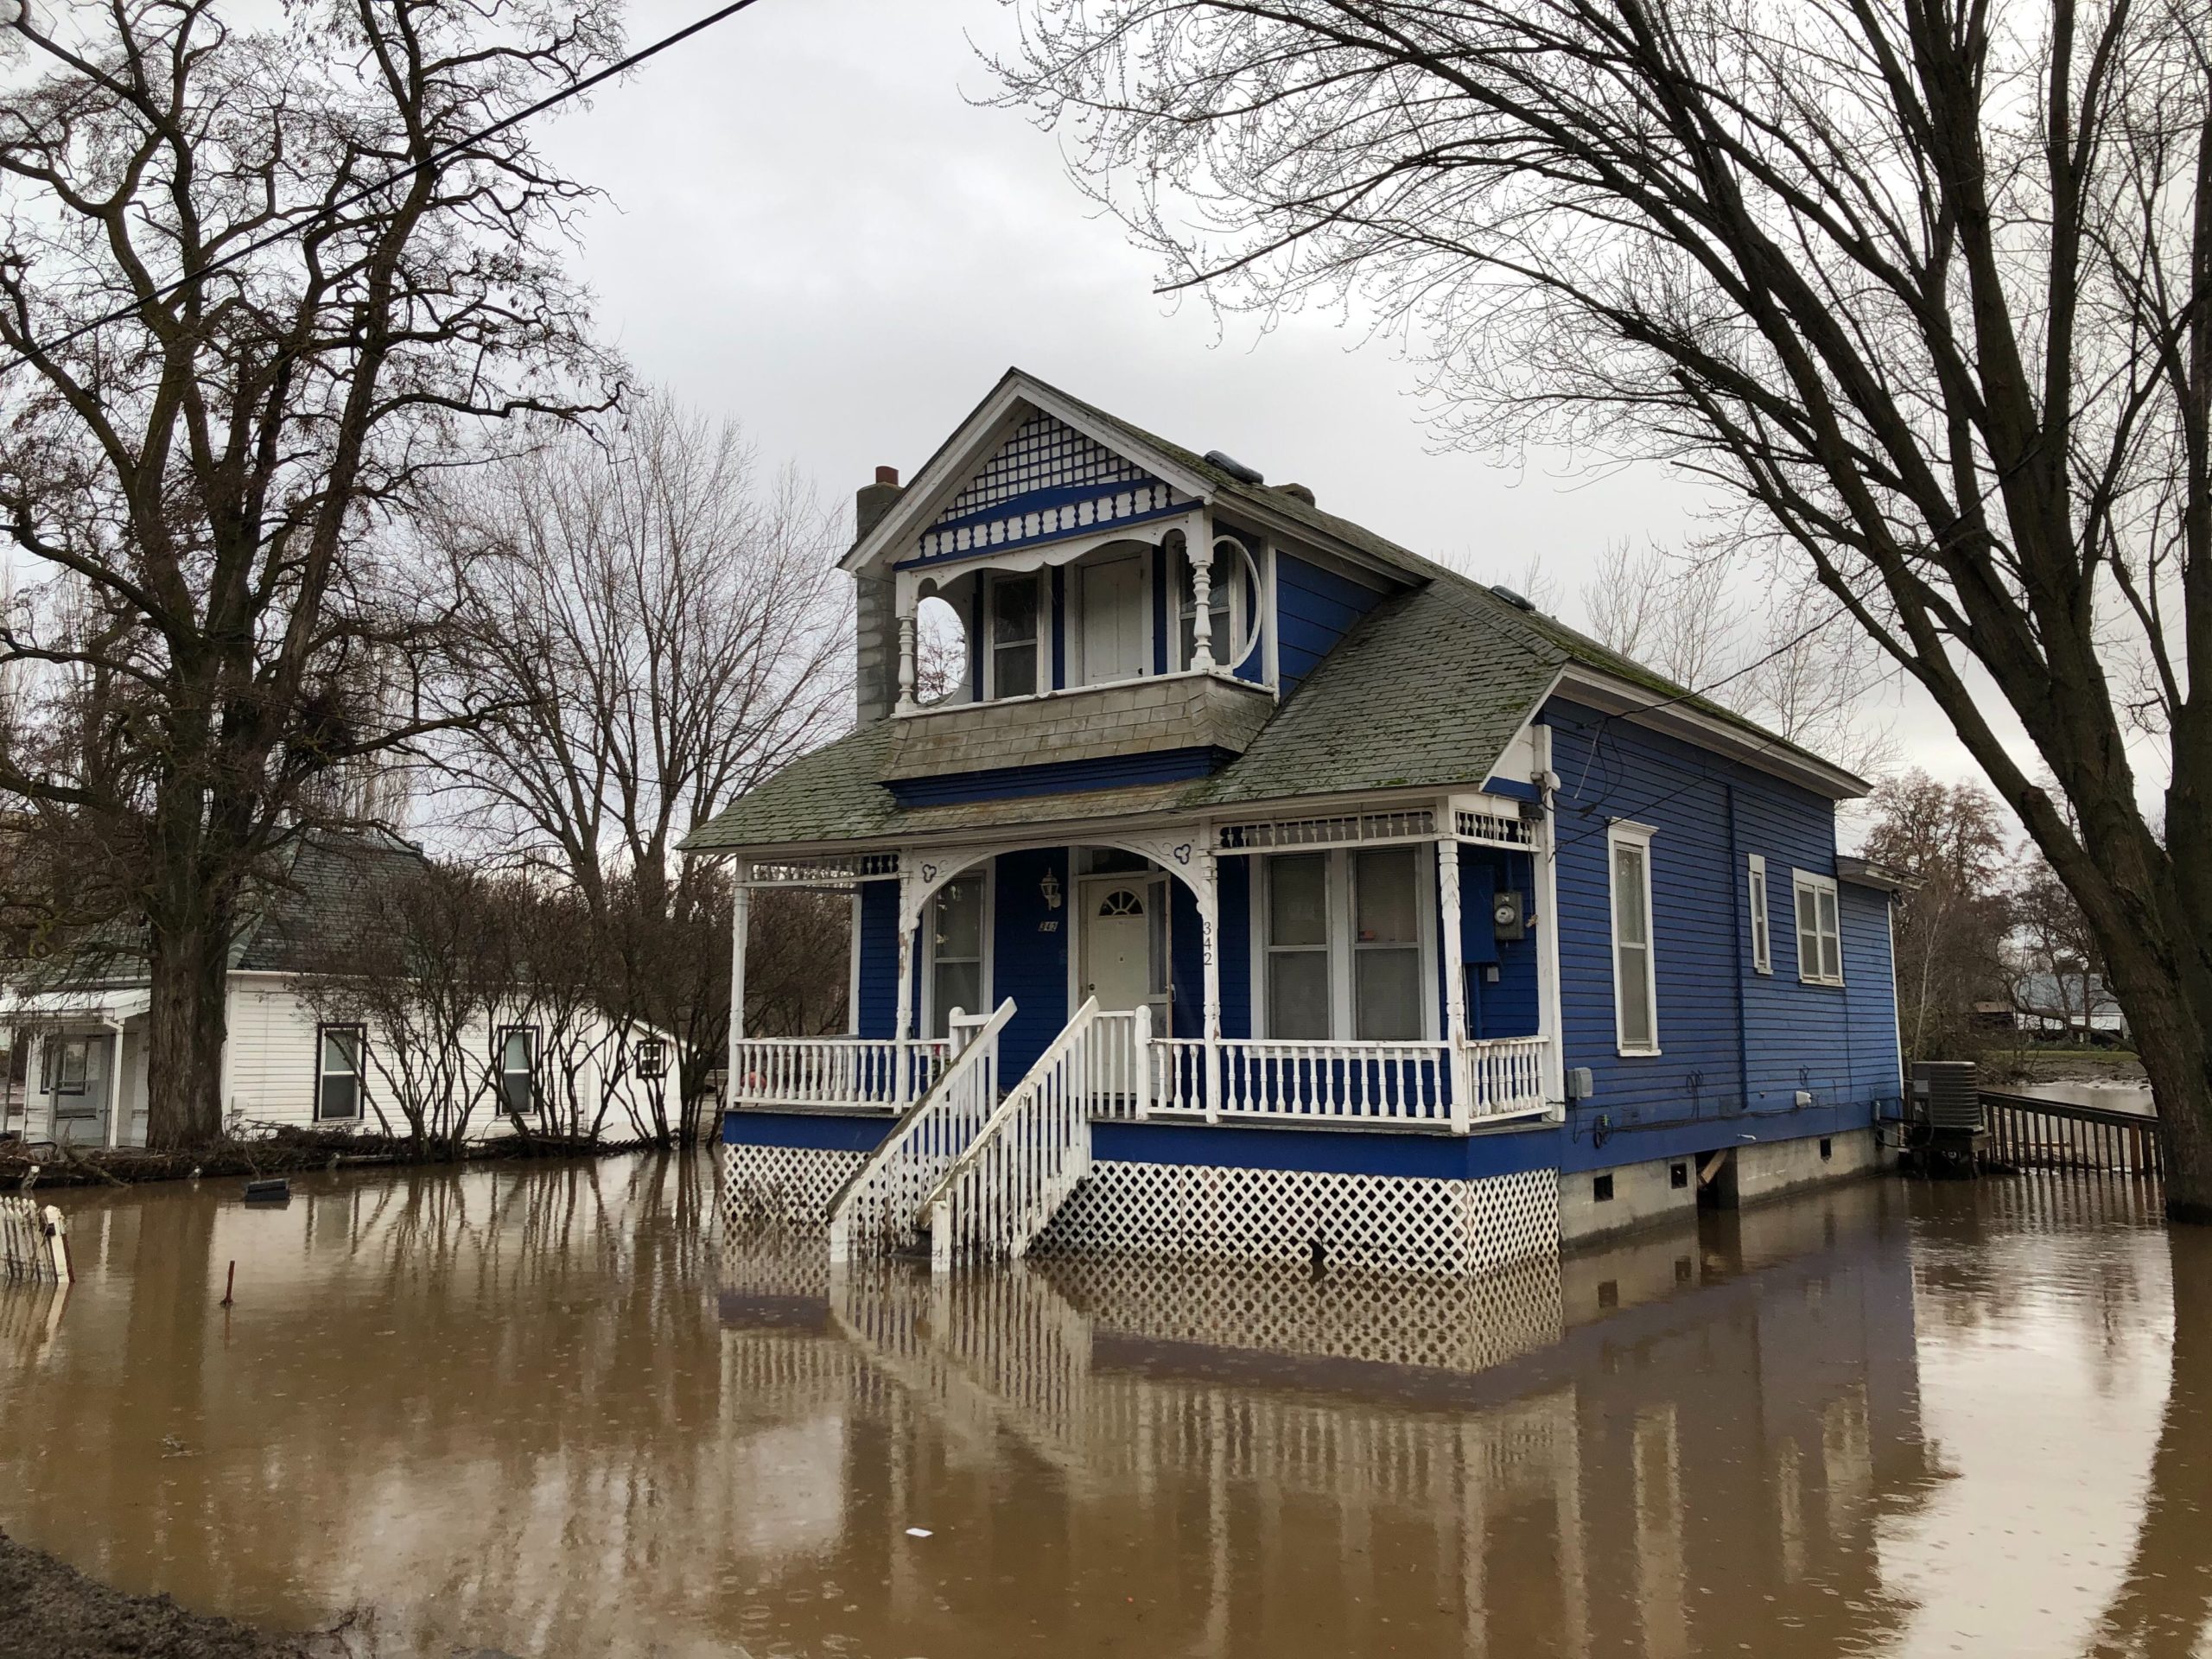 Many houses in Waitsburg, Washington, a small wheat town, are still sitting in lakes of trapped water. Residents were busy moving out their valuables, and accessing damage on Saturday, Feb. 8, 2020. CREDIT: Anna King/N3